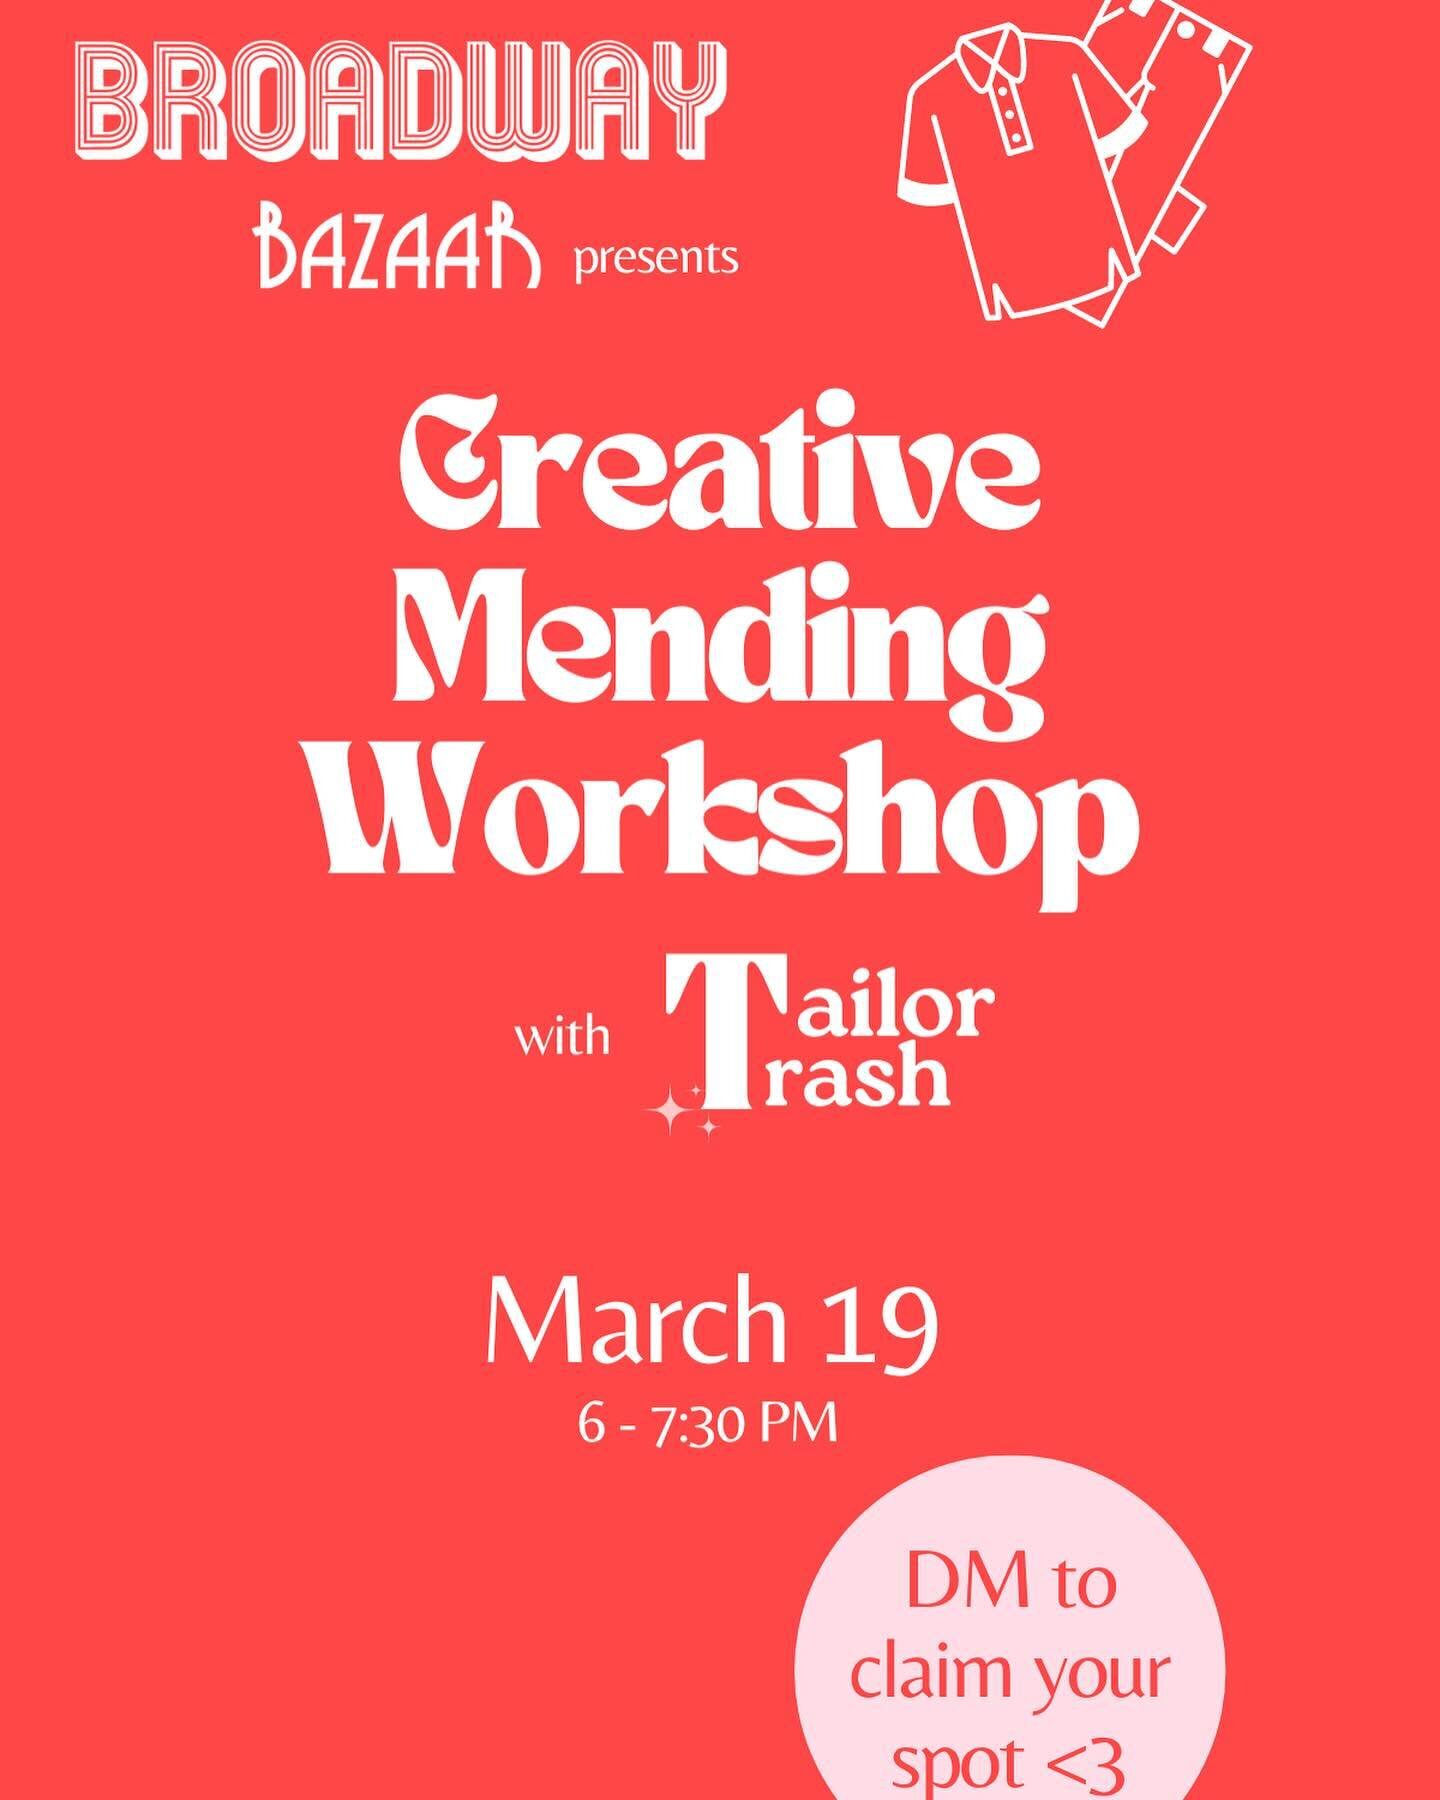 We are having a Creative Mending workshop @broadwaybazaarvtg ! For this first workshop I&rsquo;ll be focusing on covering up small holes and stains with creative embroidery. This workshop is great for beginners and experts! Cute date night as well. D